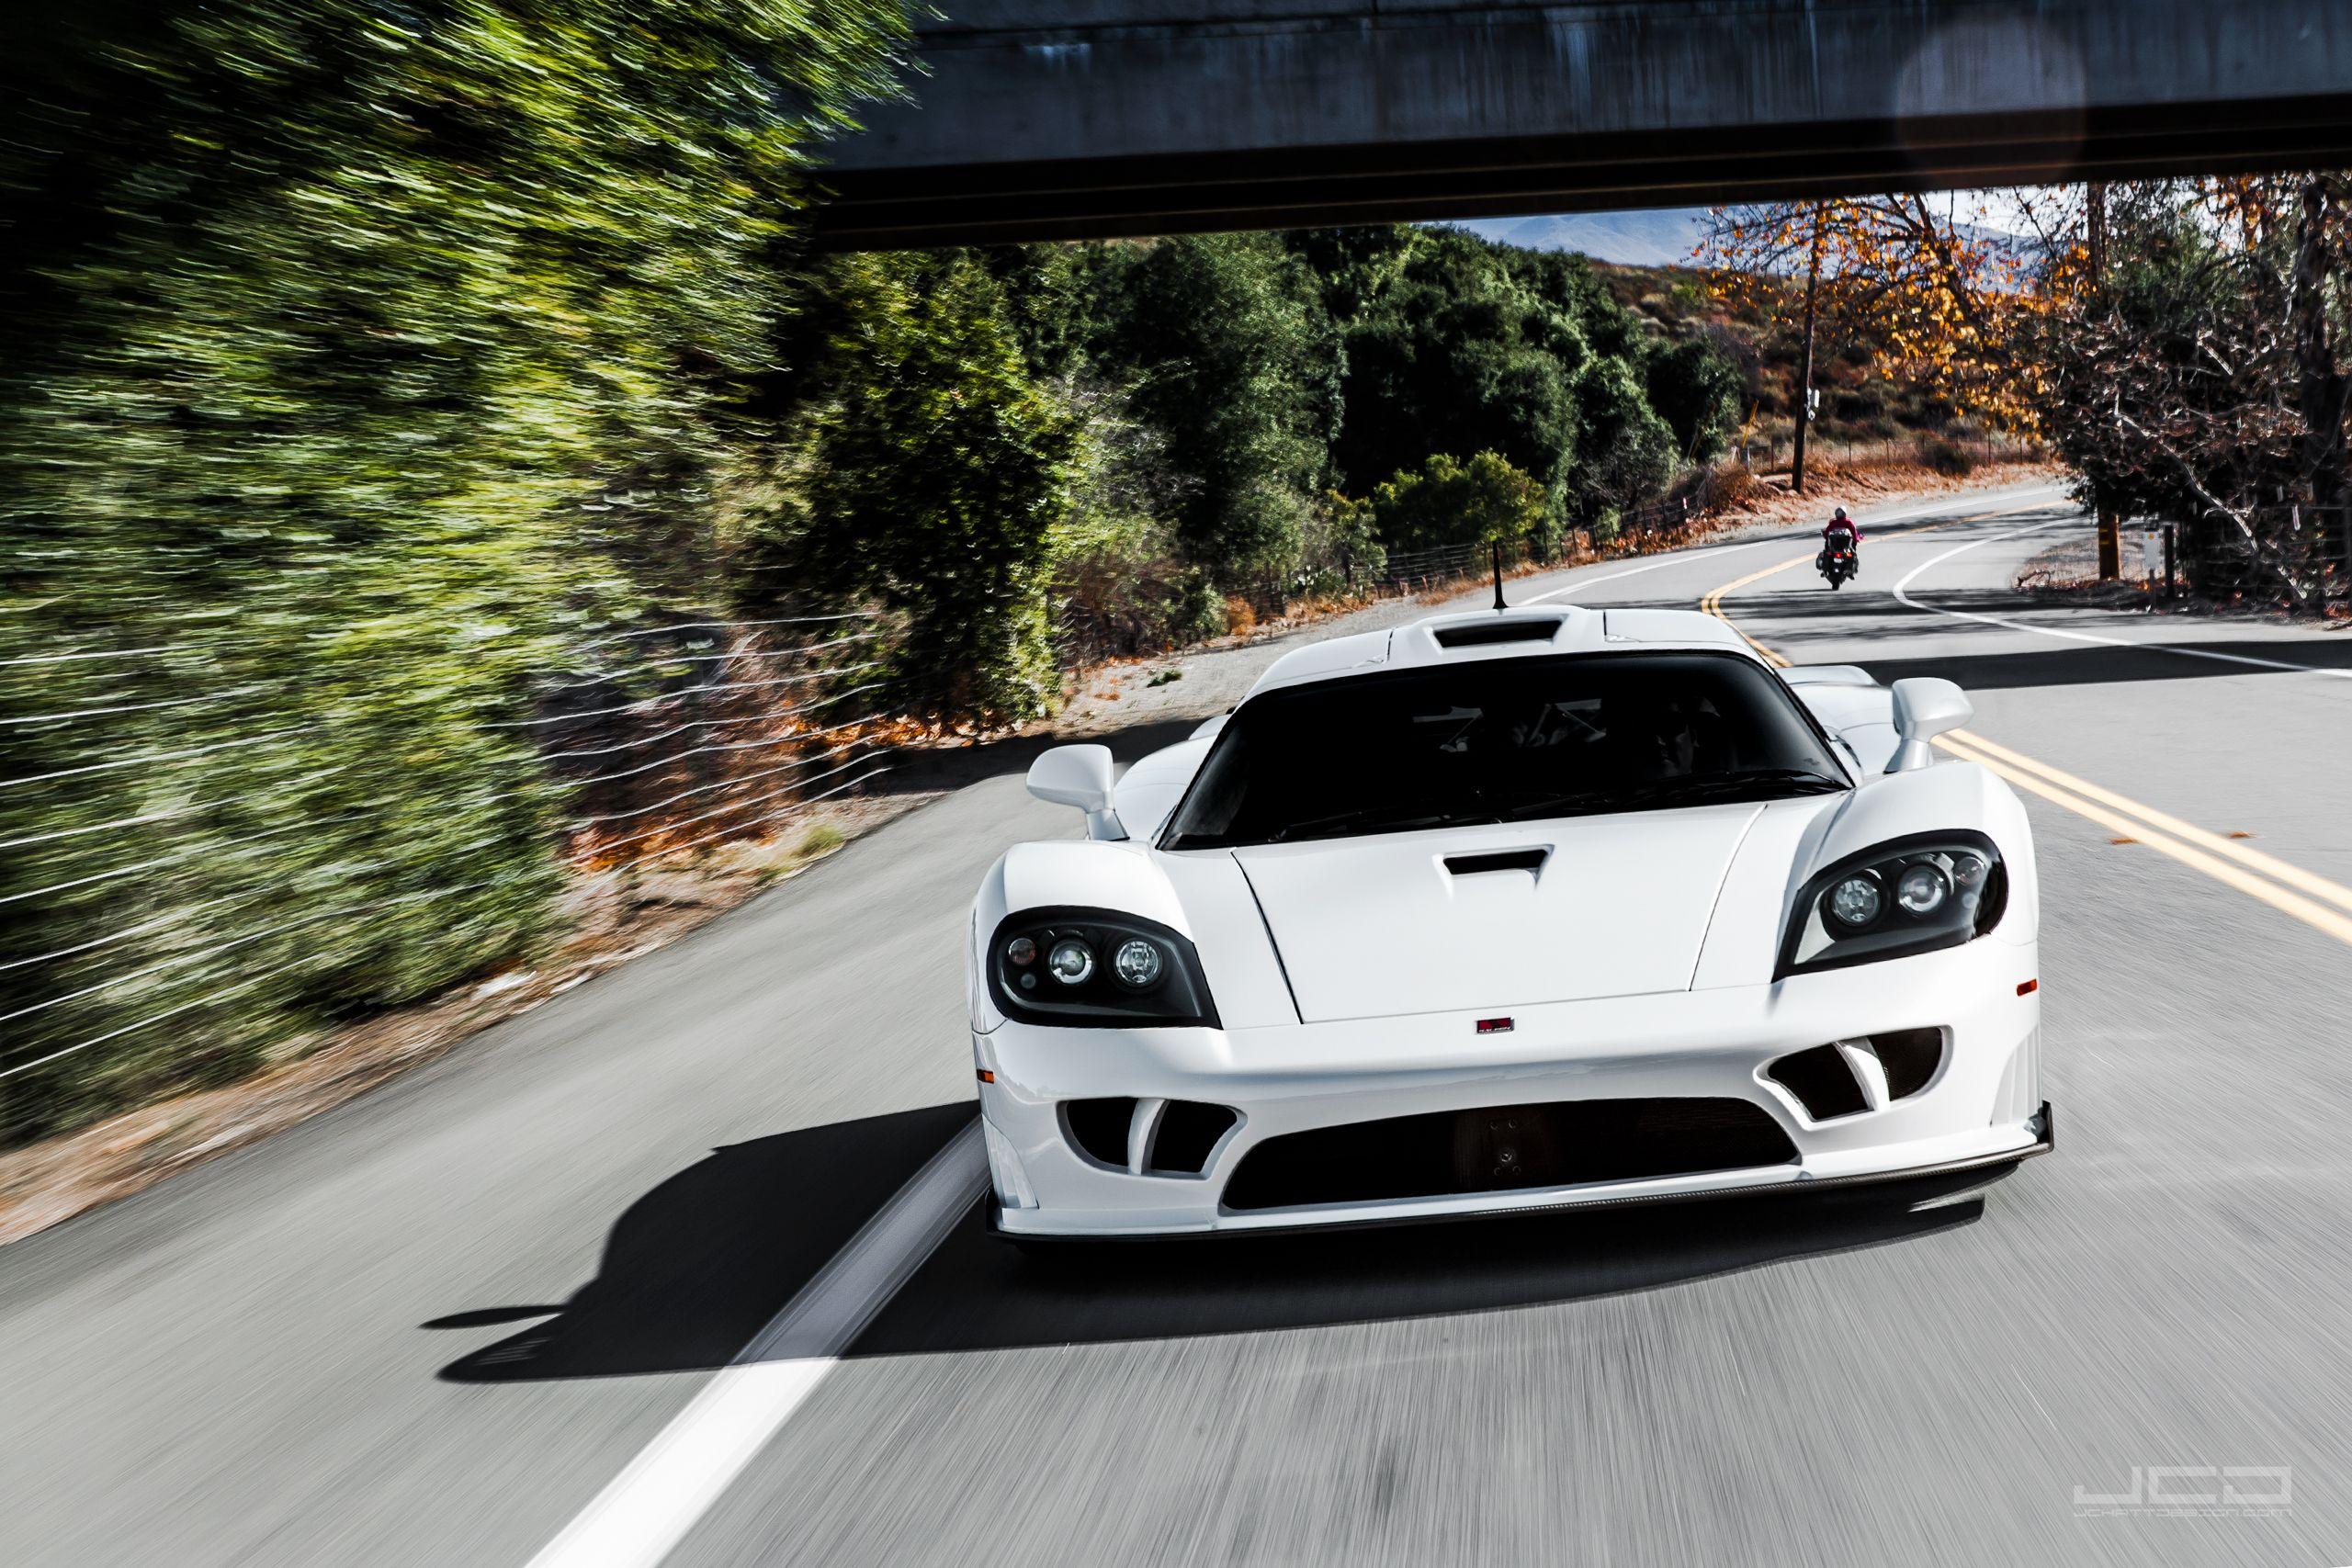 2005 Saleen S7 Twin Turbo - Wallpapers and HD Images | Car Pixel